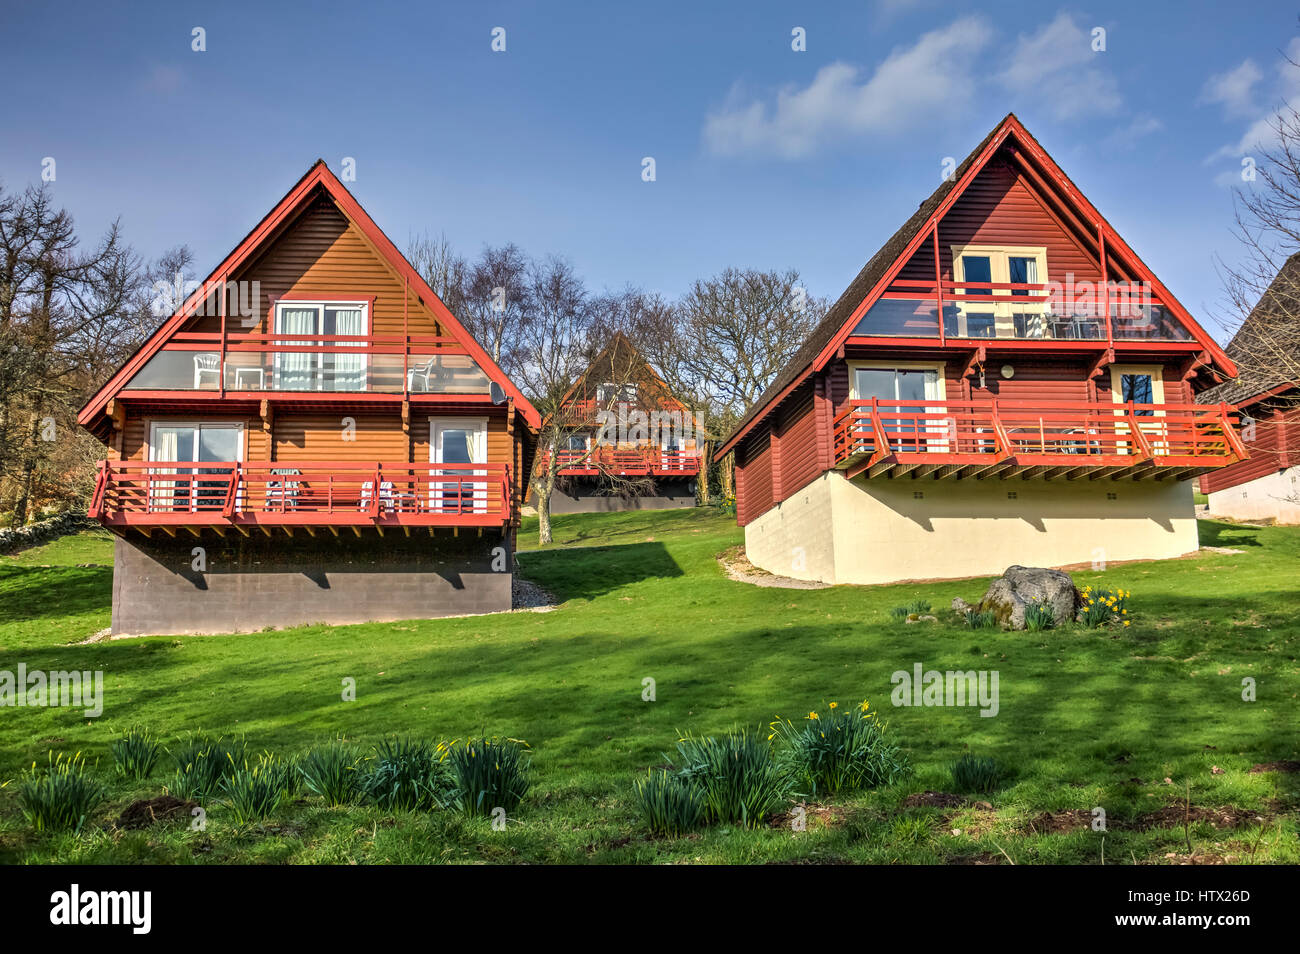 Holiday Lodges a Barend Holiday Village, Dumfries and Galloway, Scotland, Regno Unito. Foto Stock